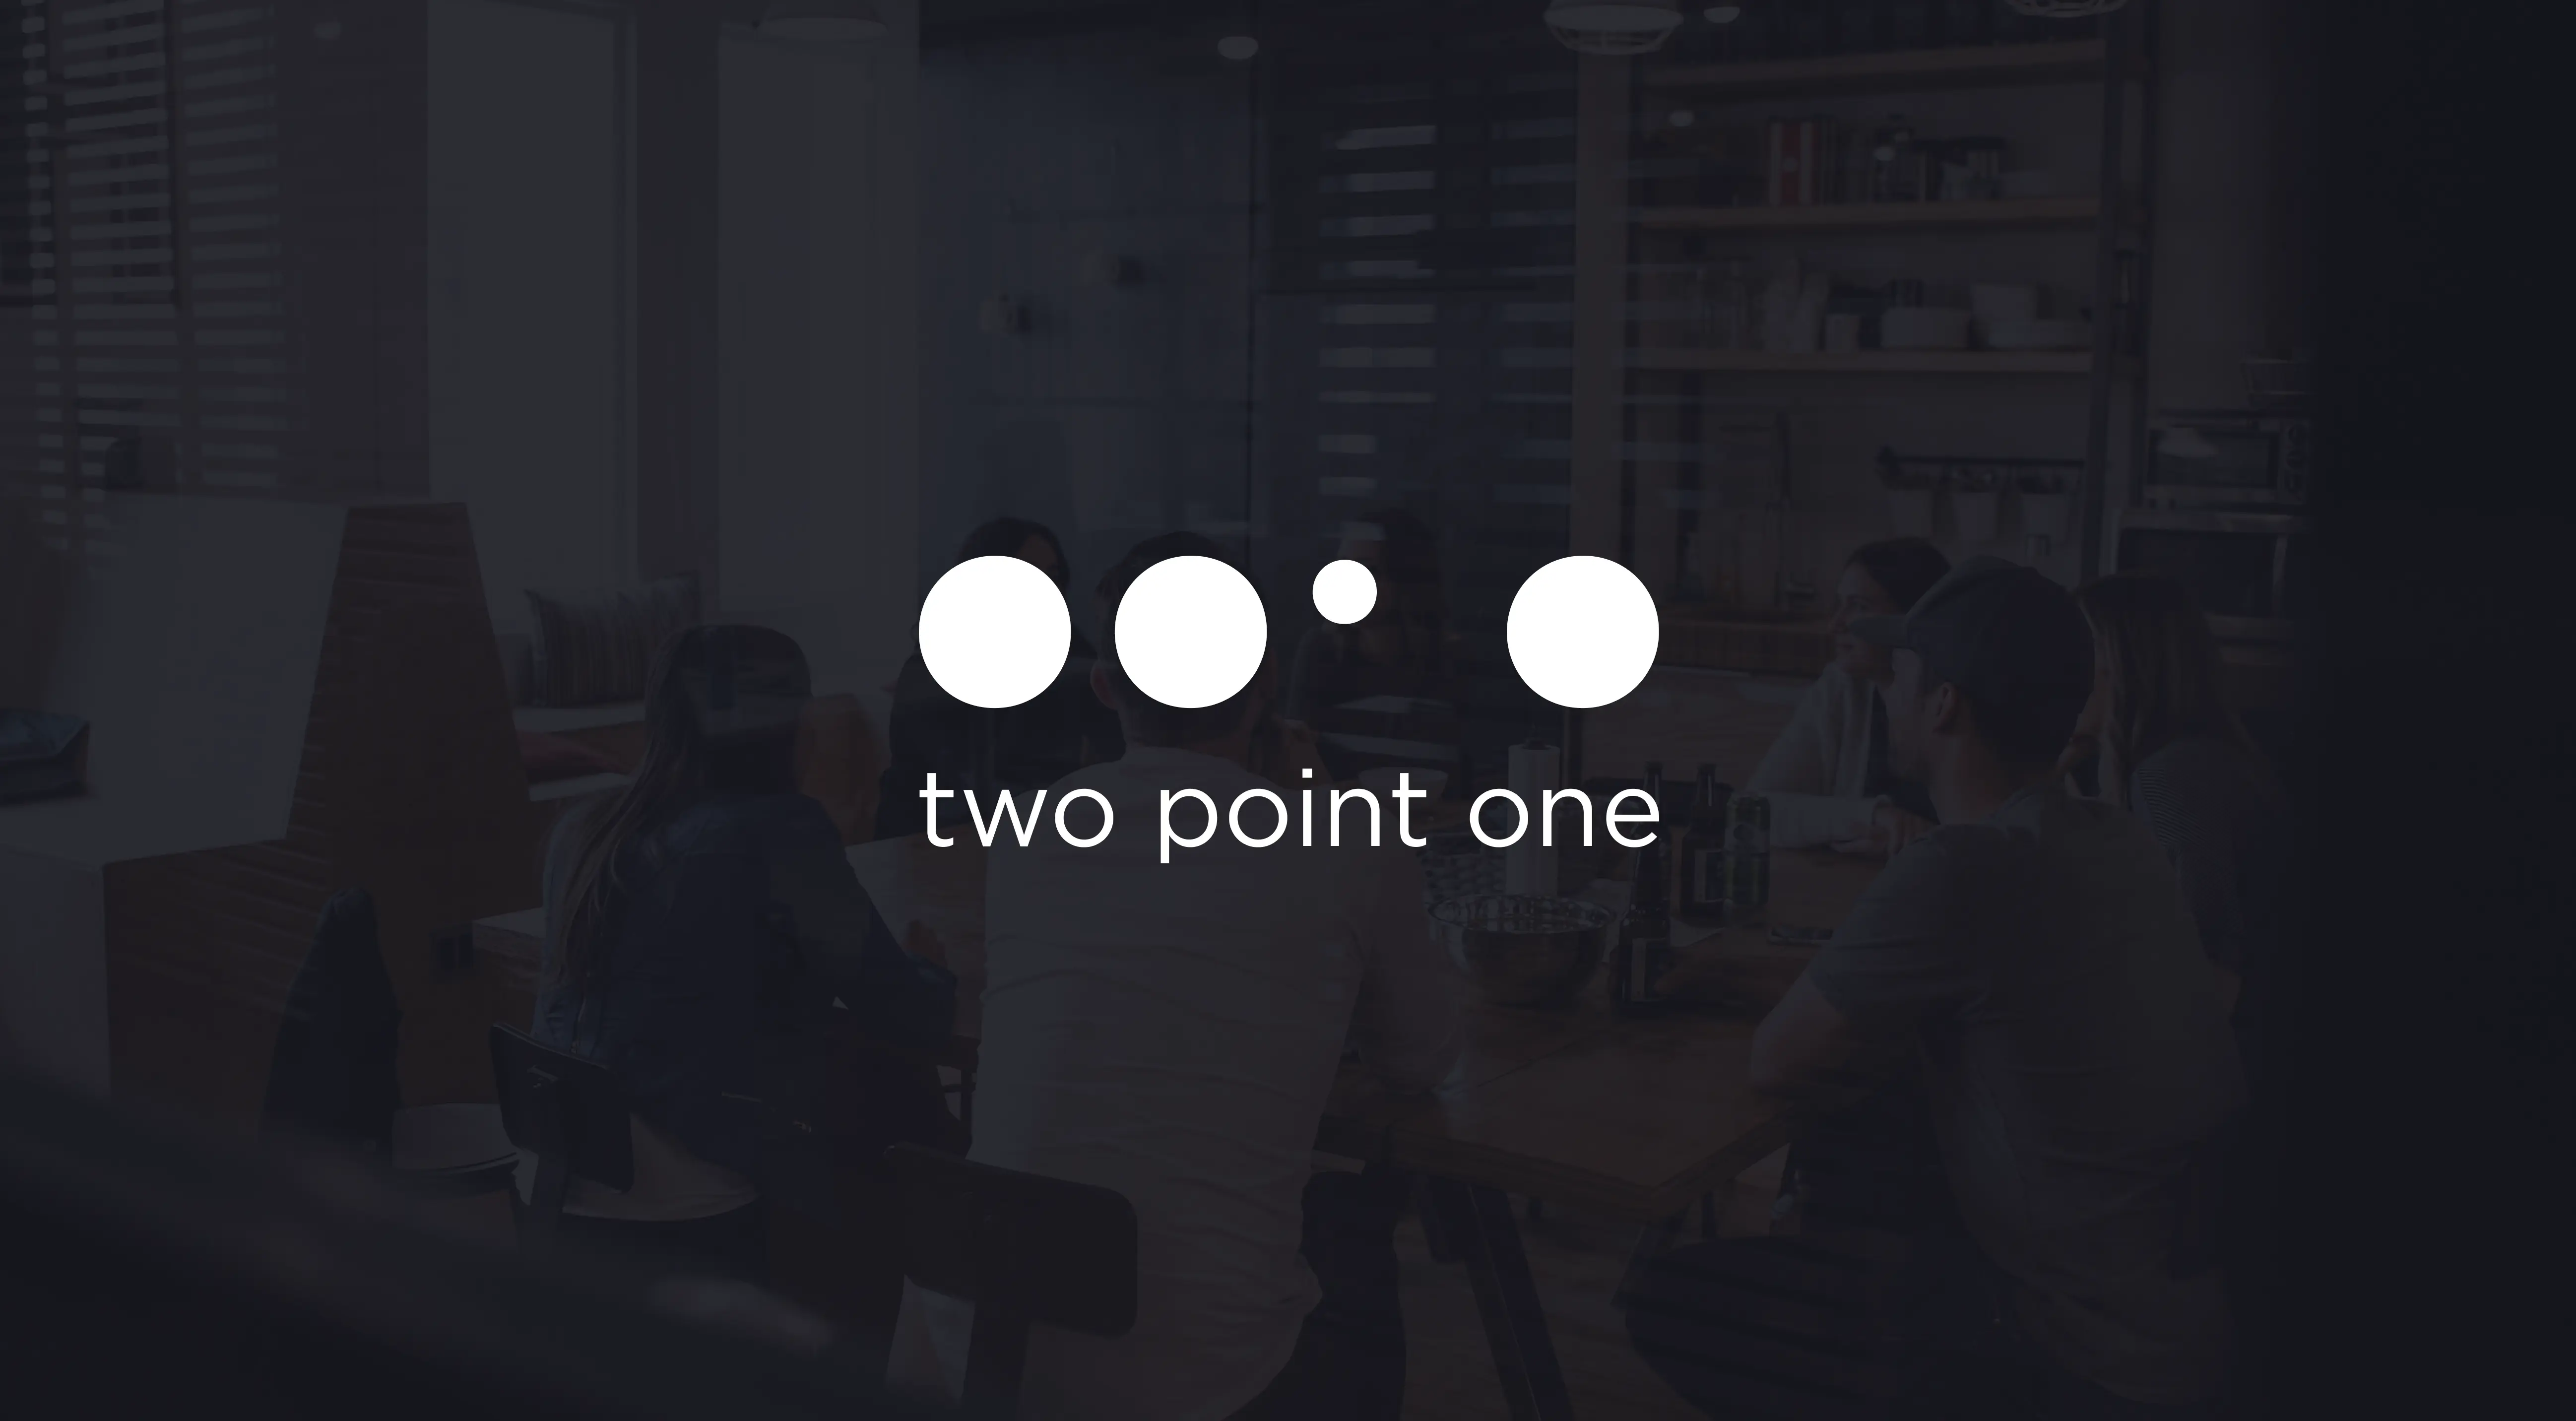 Originating Two Point One-About our Rebrand